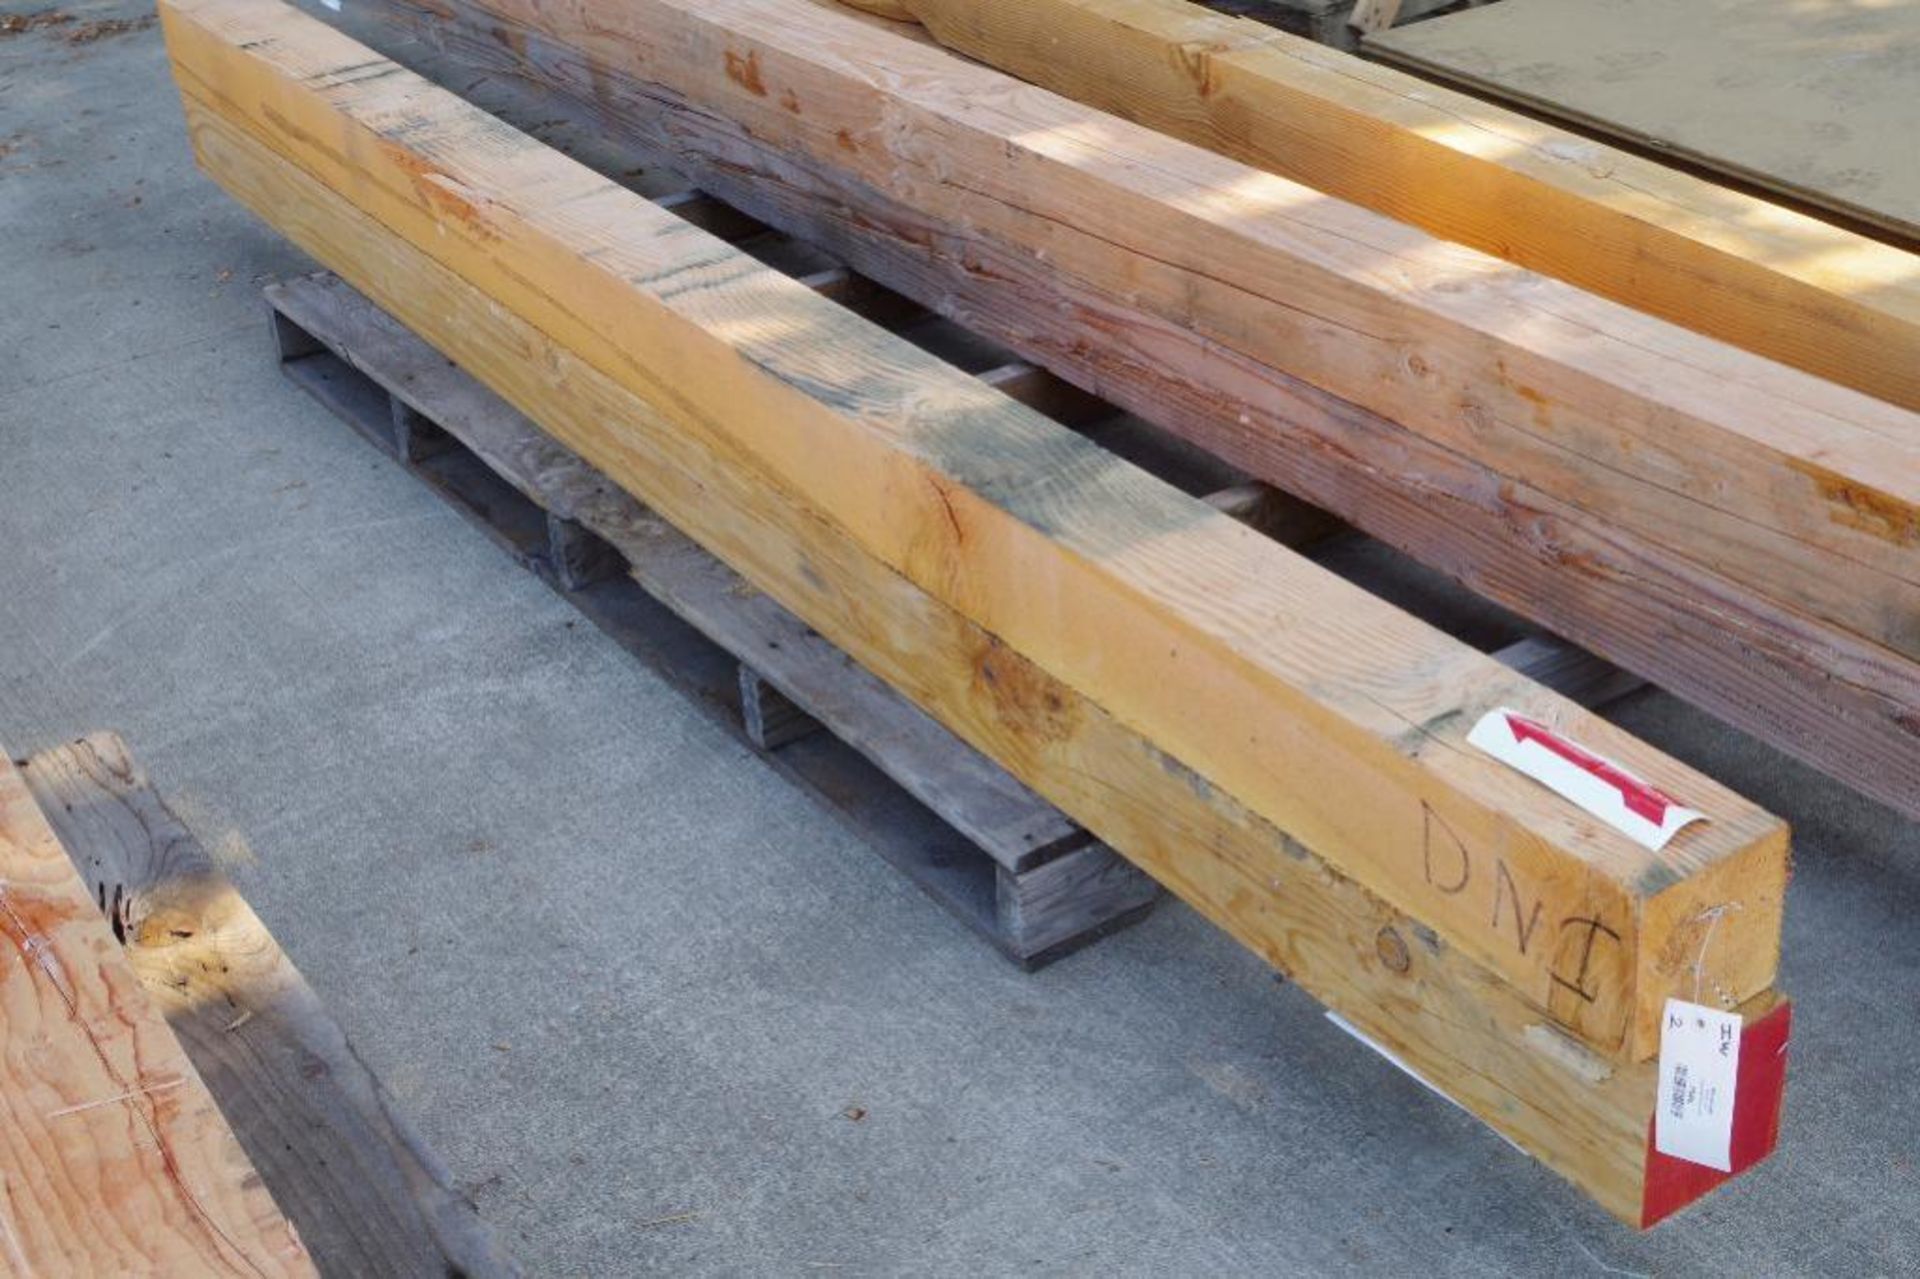 (2) 6 x 6 x 10' Fir, Timber has defects, Please preview